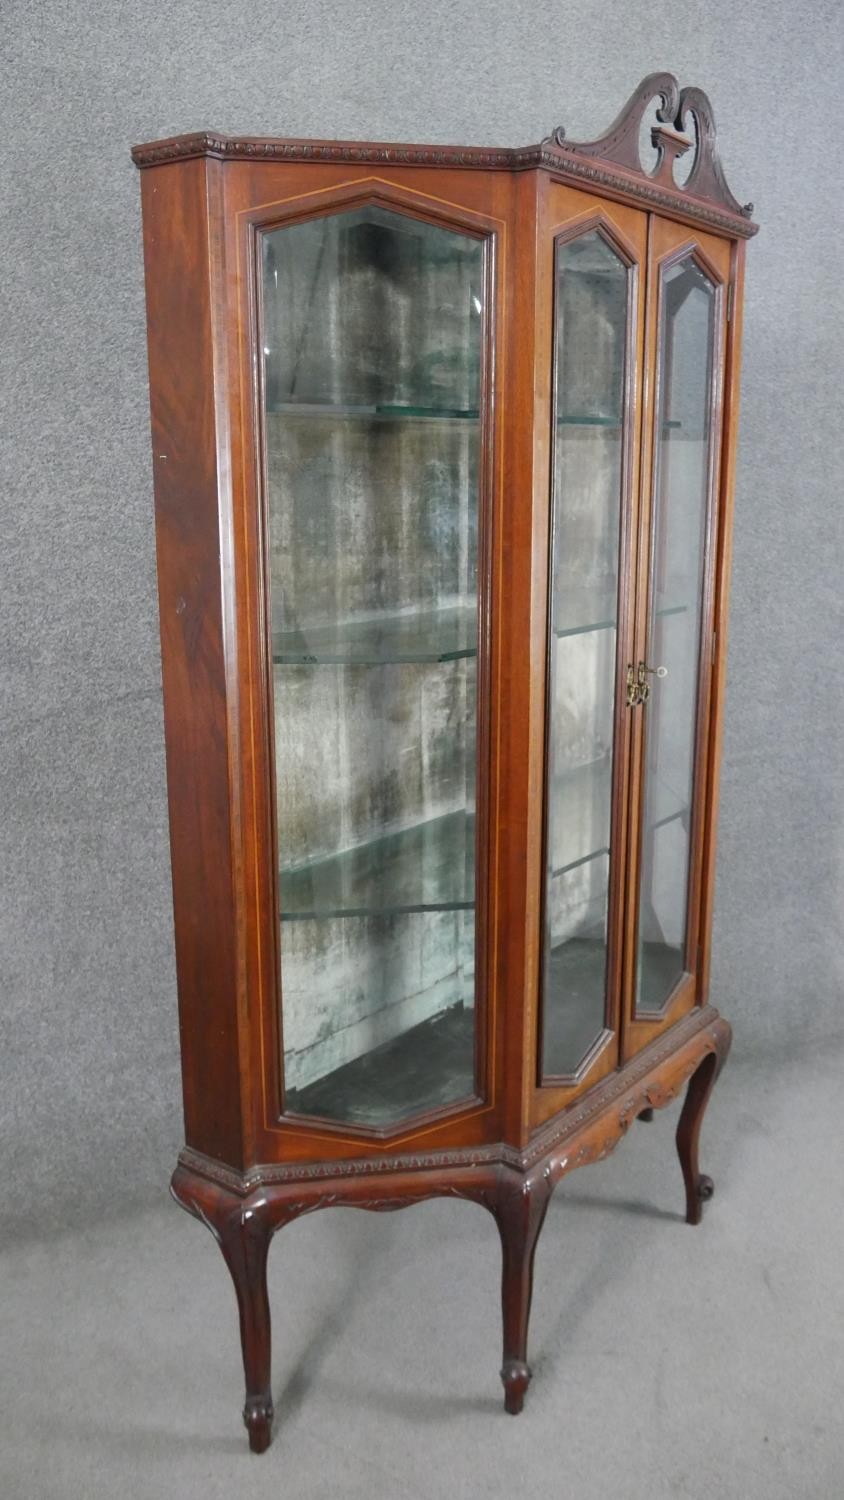 An Edwardian mahogany display cabinet, with a swan neck pediment, over a pair of bevelled glass - Image 8 of 8